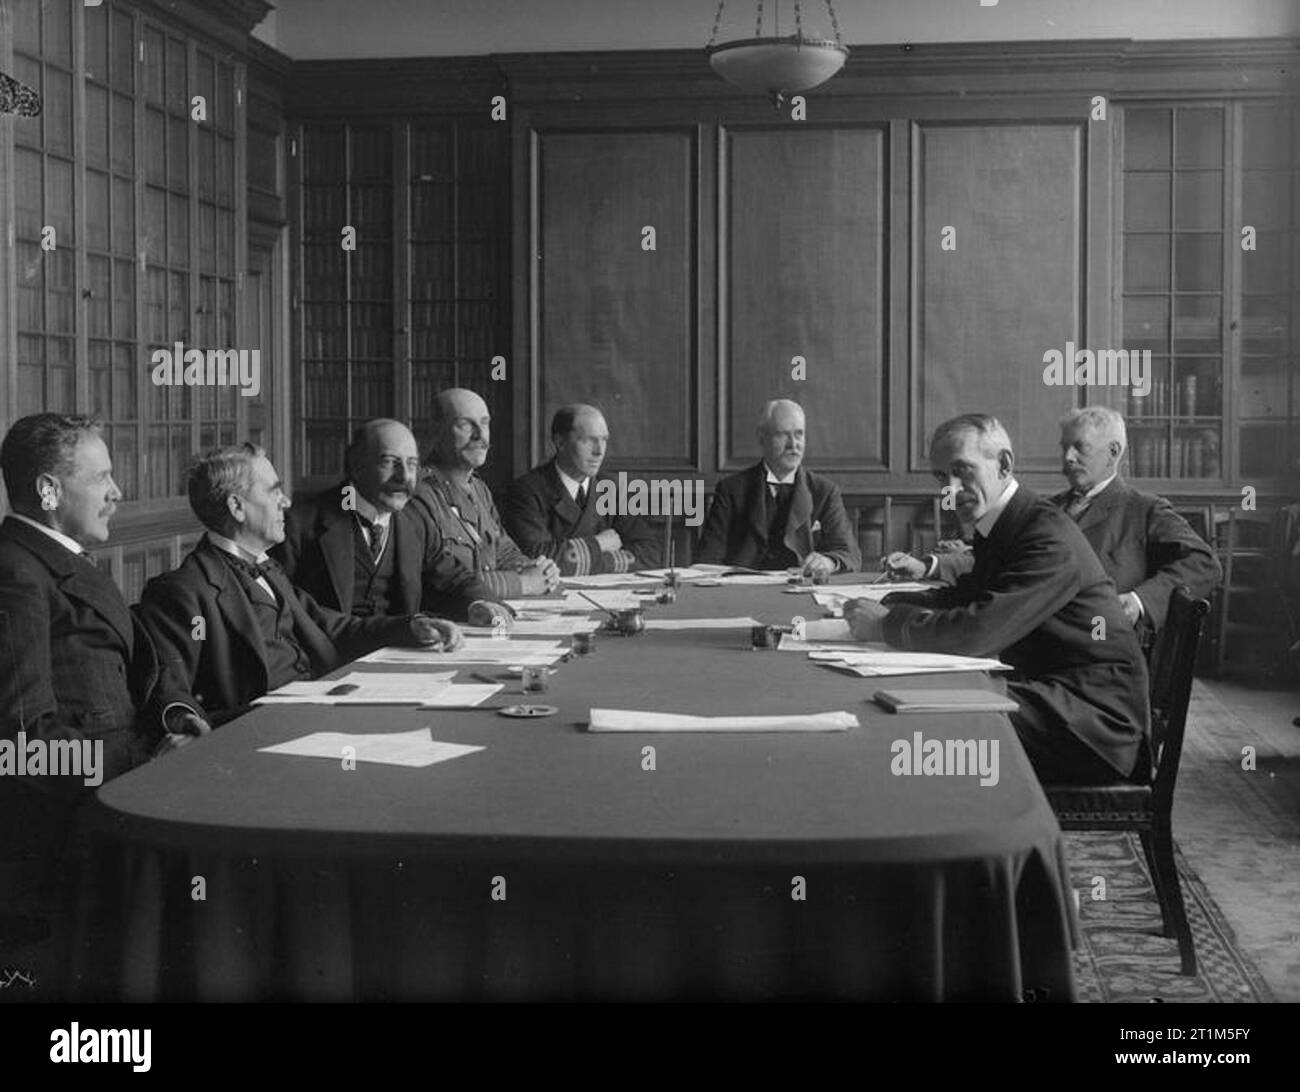 Ministry of Information First World War Official Collection Committee of the Imperial War Museum 1918-1919. left to Right: Ian Malcolm, Esq, M.P., Sir Martin Conway M.P., F.S.A, Rt. Hon. Sir Alfred Mond, P.C., M.P., Col. J.R. Stansfield, C.B., Capt. C.C. Walcott, R.M., B.B. Cubitt Esq., C.B., C.W. Oman Esq, M.P., Major Charles Ffoulkes R.M., F.S.A. Stock Photo